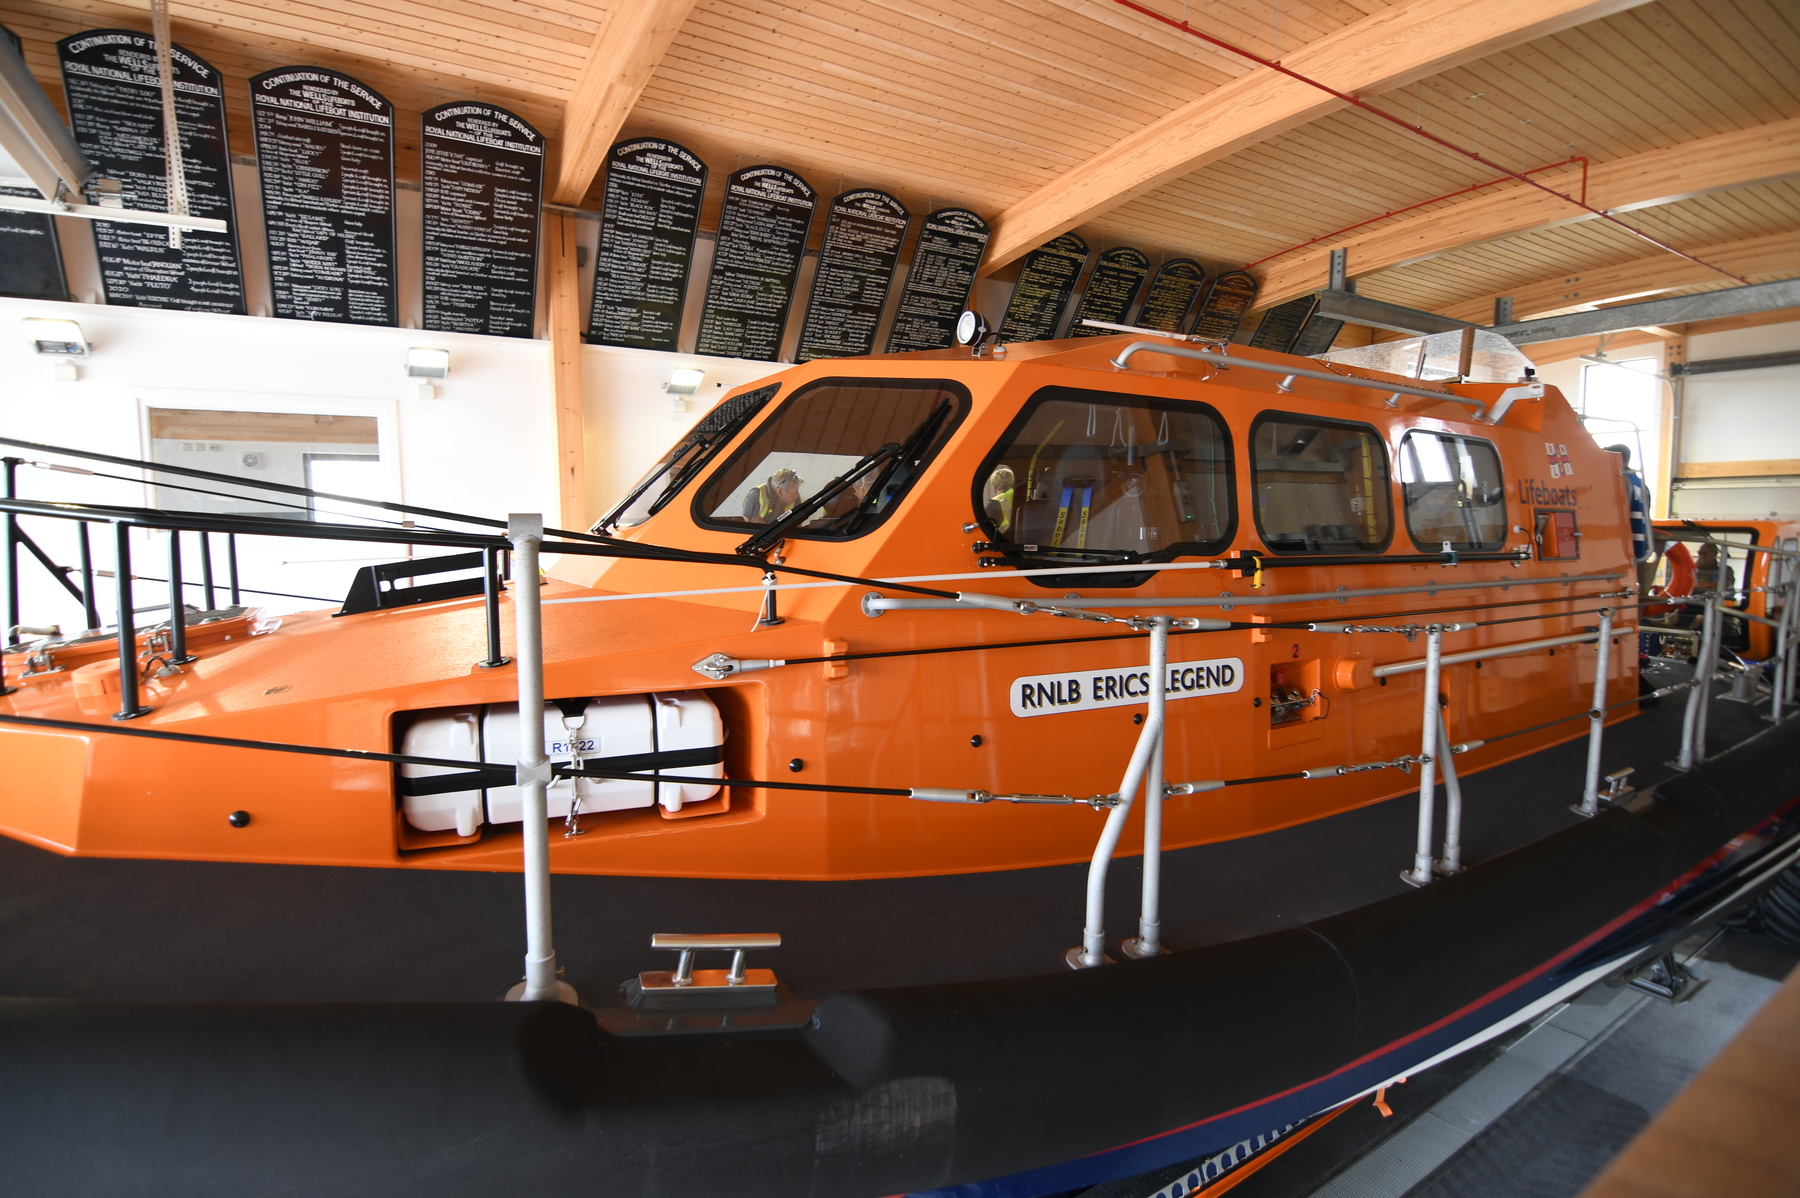 Relief lifeboat 13-40 in position in the new boathouse during training